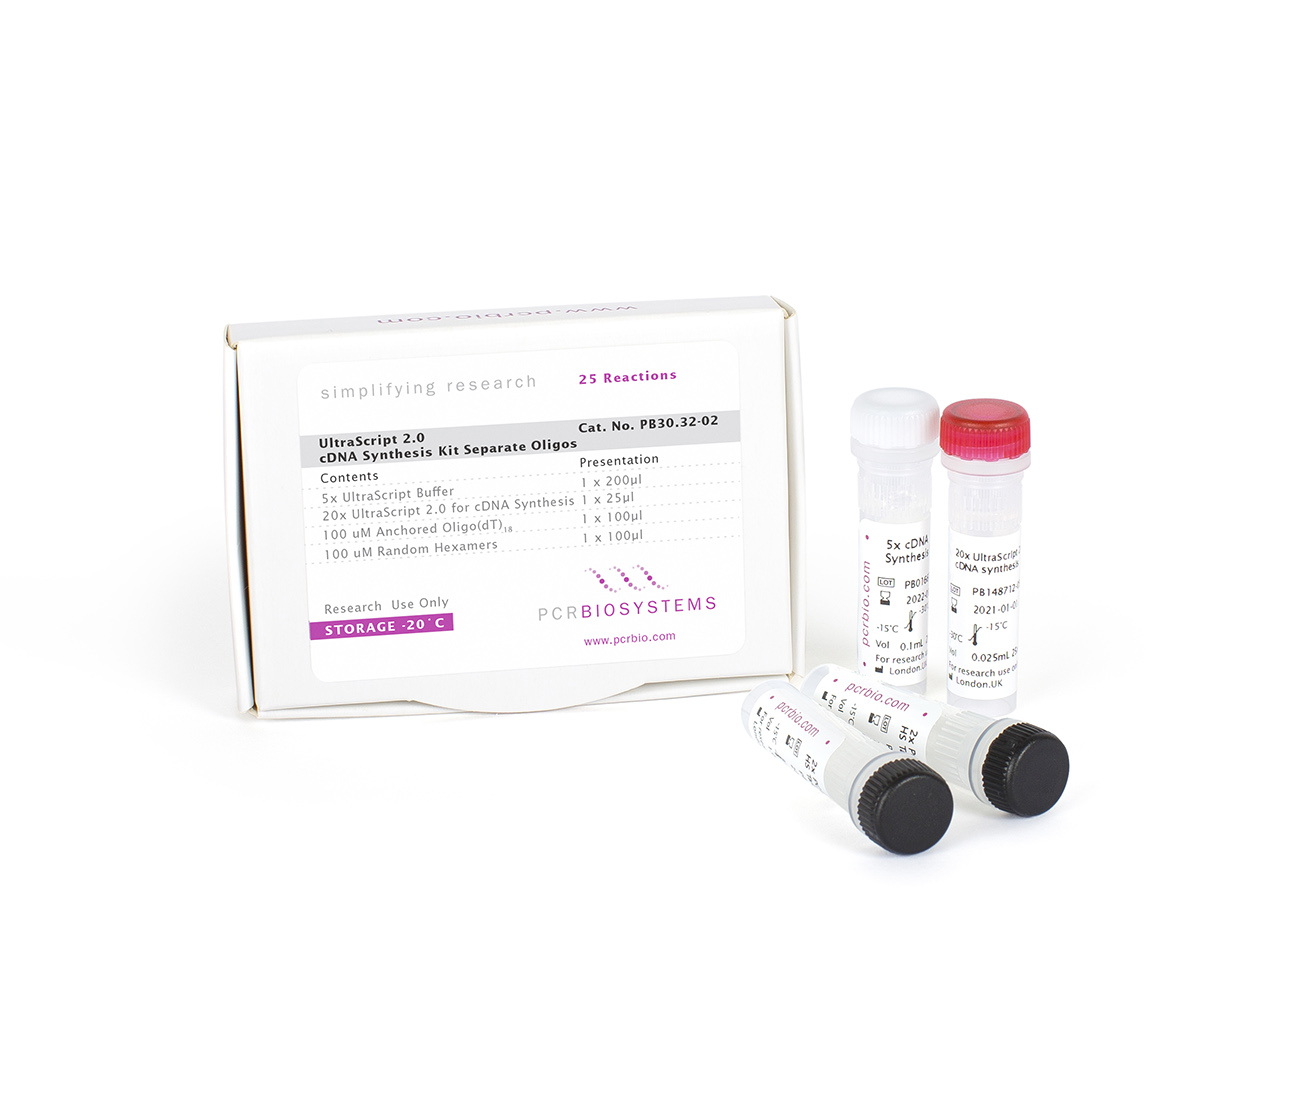 Product picture of UltraScript 2.0 cDNA Synthesis Kit Separate Oligos